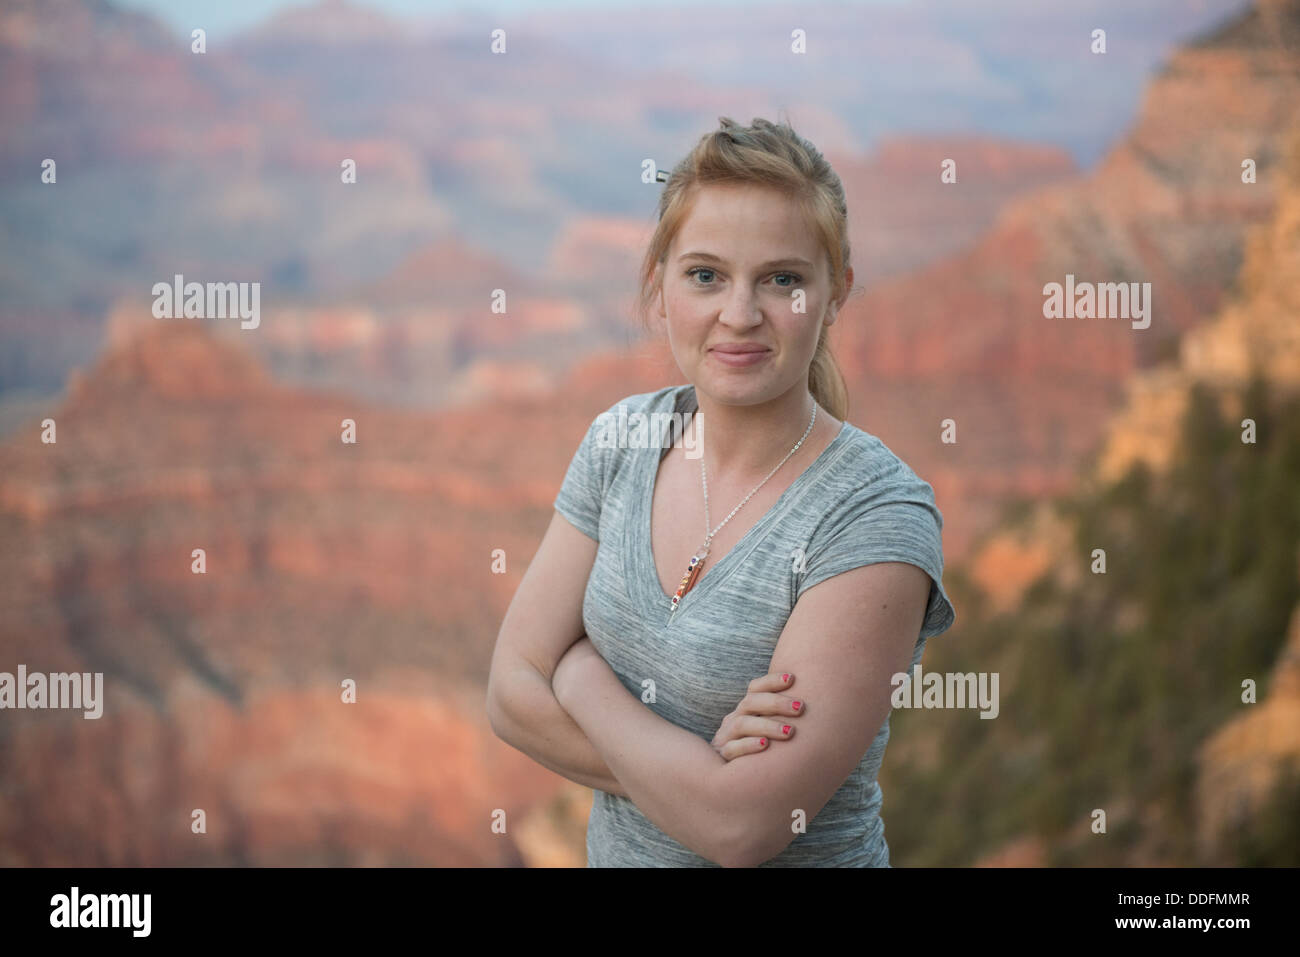 Grand Canyon Portrait of a Young Woman Stock Photo